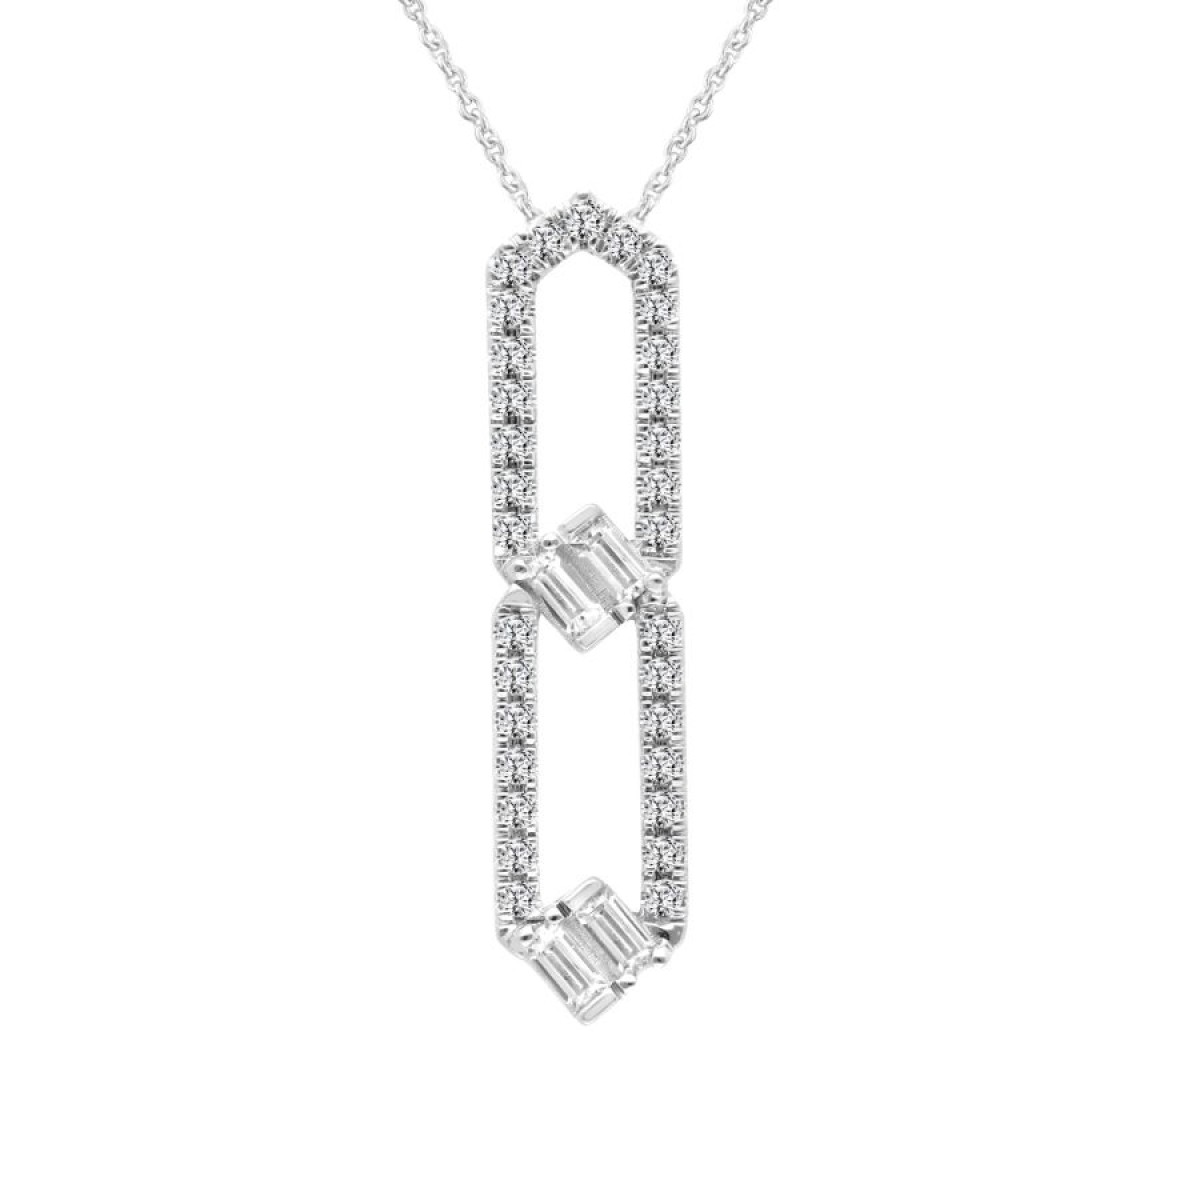 14K WHITE GOLD 1/4CT ROUND/BAGUETTE DIAMOND LADIES PENDANT WITH CHAIN  